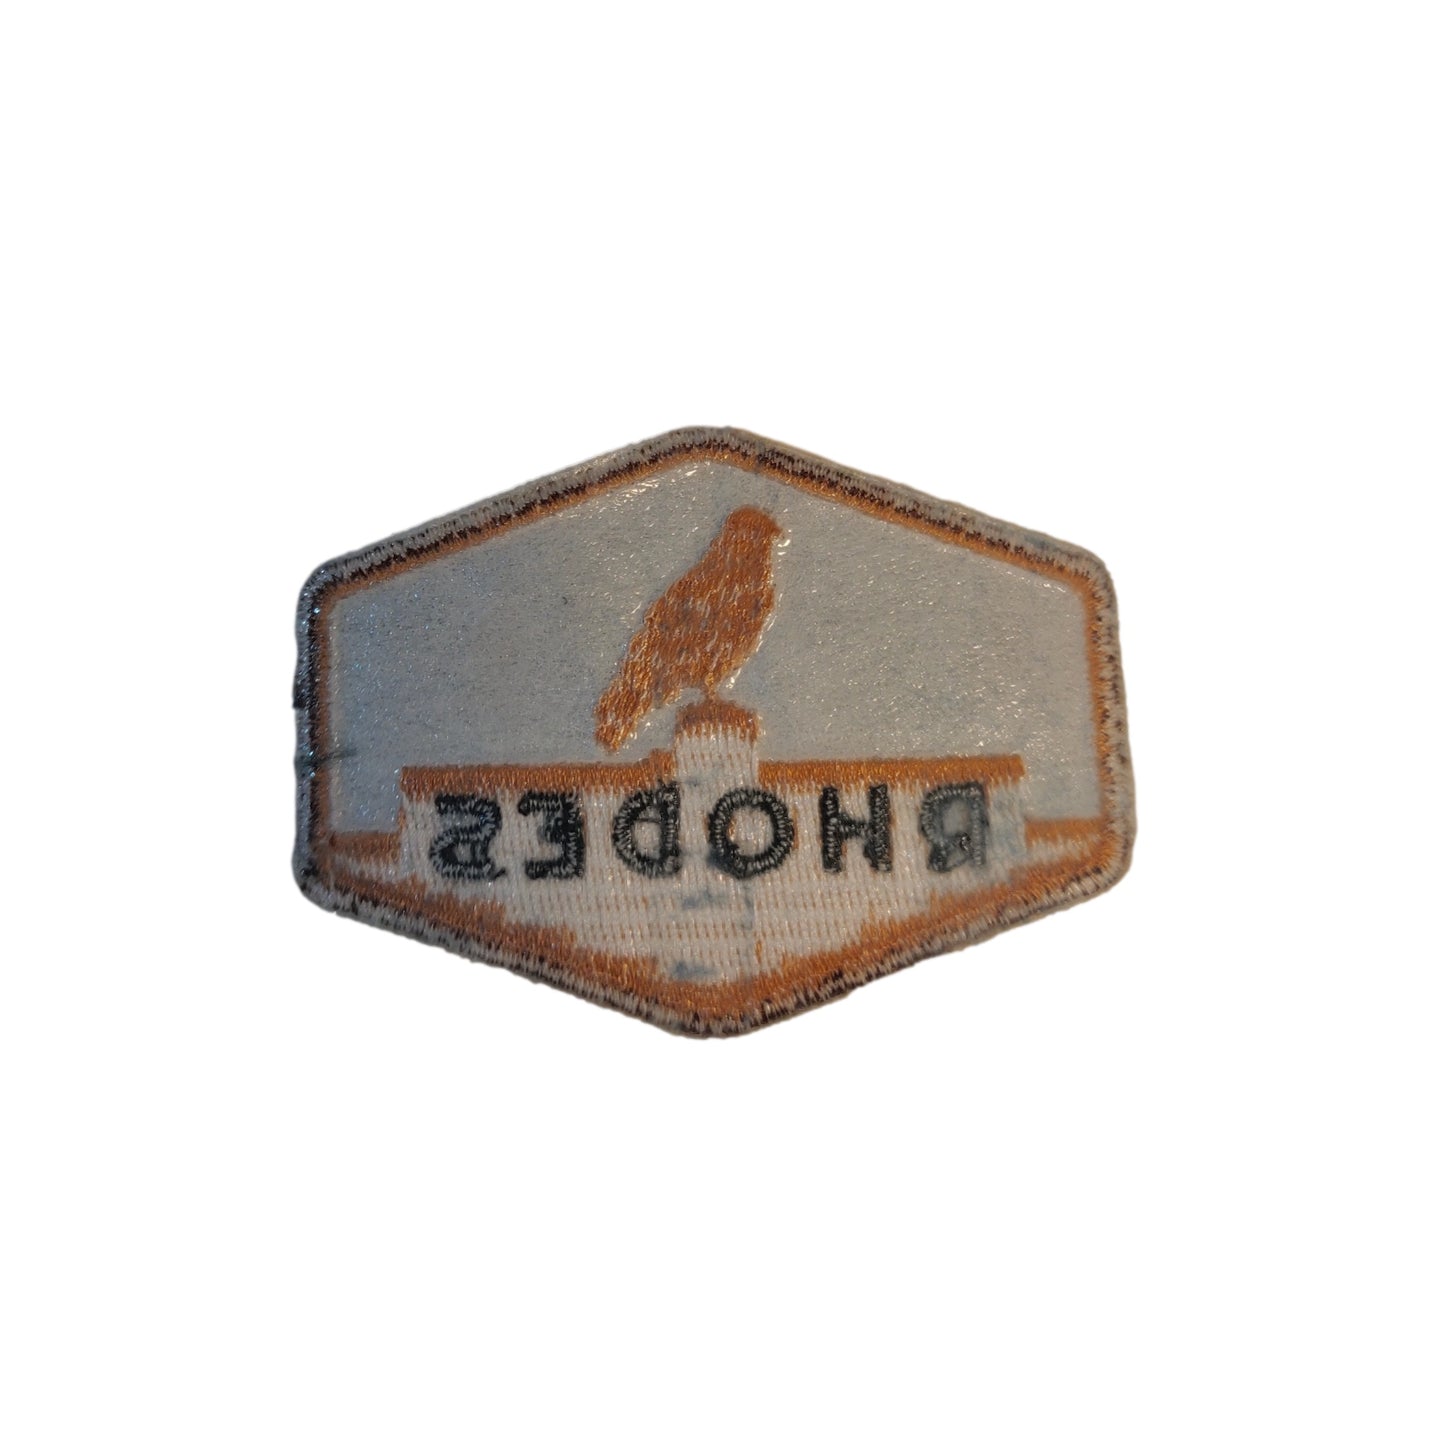 Iron-on patch